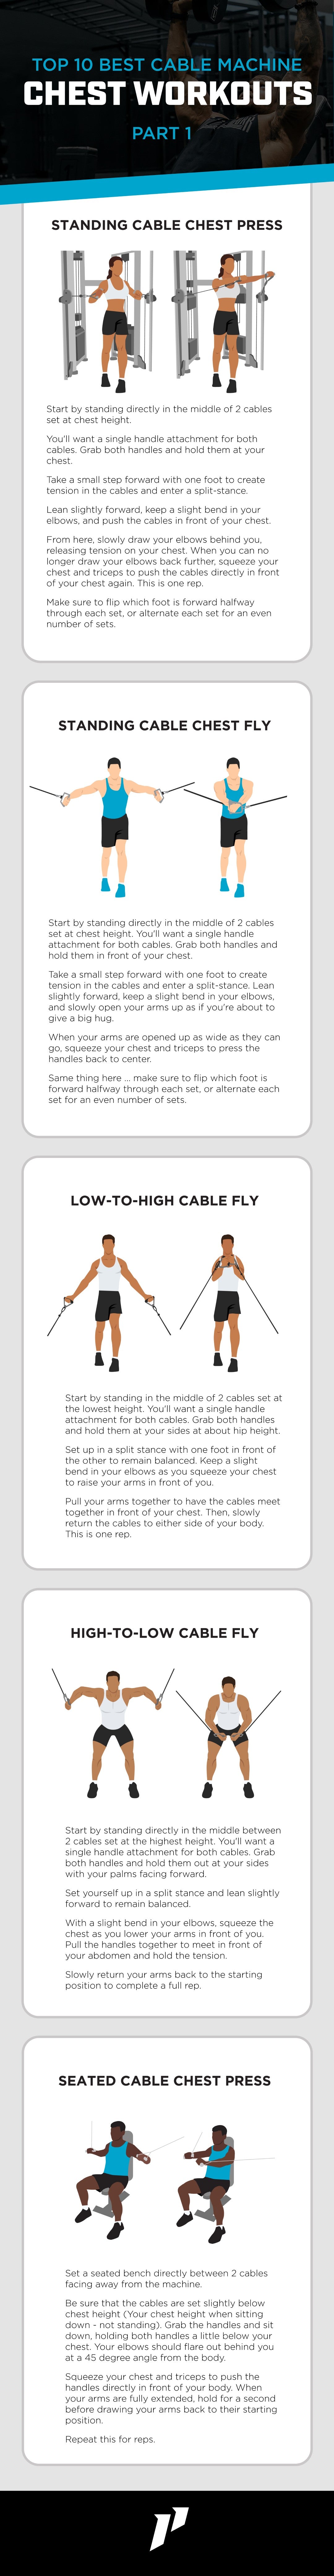 The 10 Best Cable Machine Chest Workouts